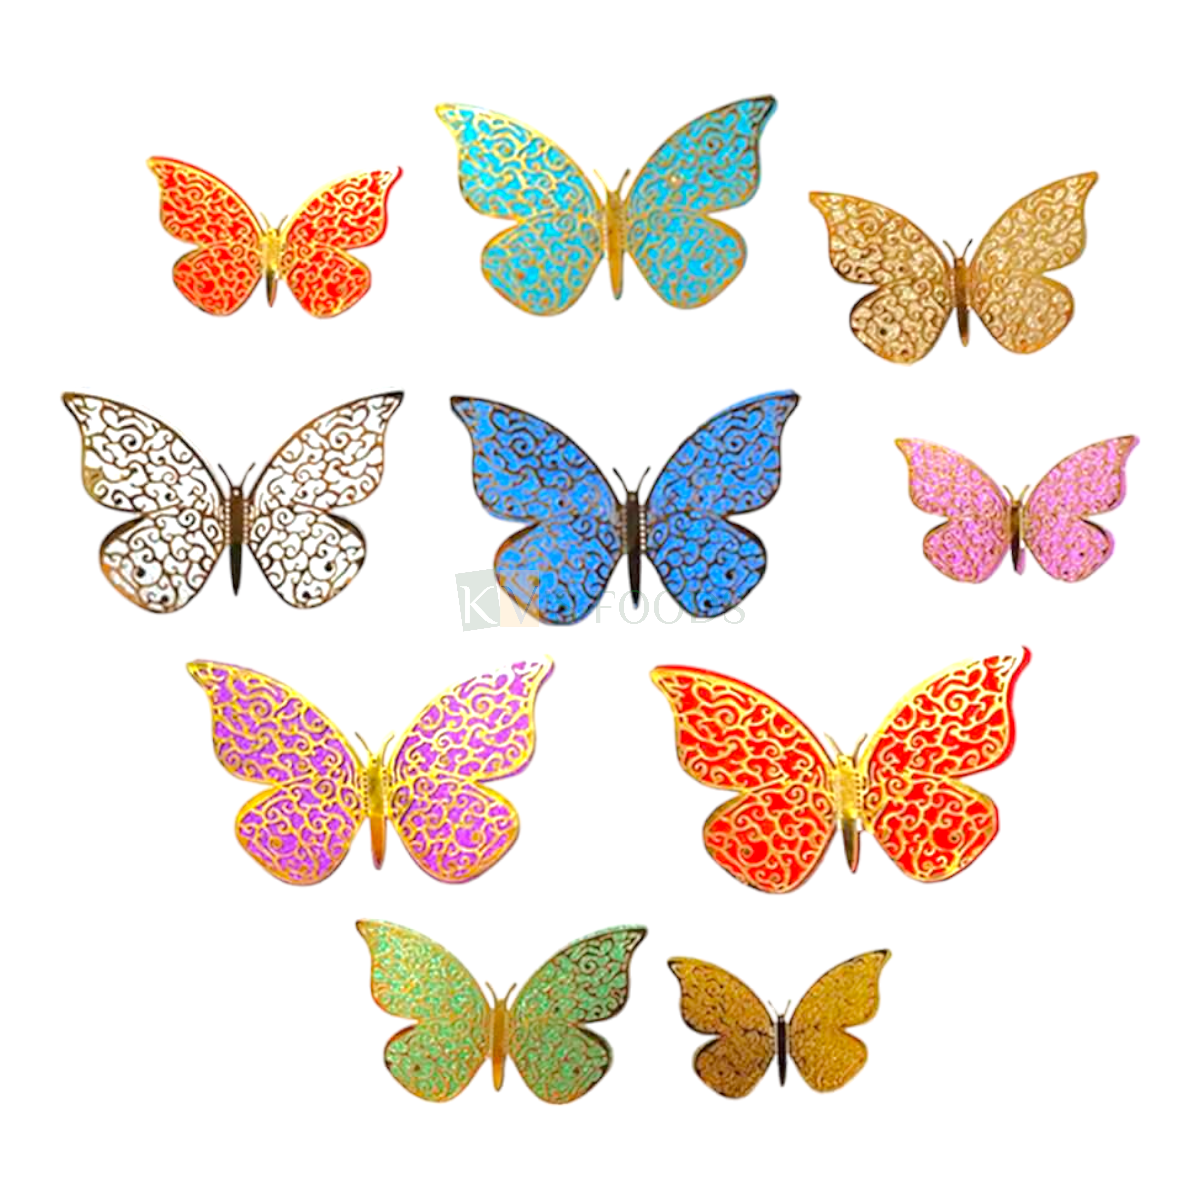 12 PCS Shiny Fancy 3D Colourful Metallic Different Size Designed Double Layer Butterfly Cake Topper Vein Glitter Hard Paper Foldable Butterfly Cake Toppers, Birthday Anniversary Side Cake Decorations